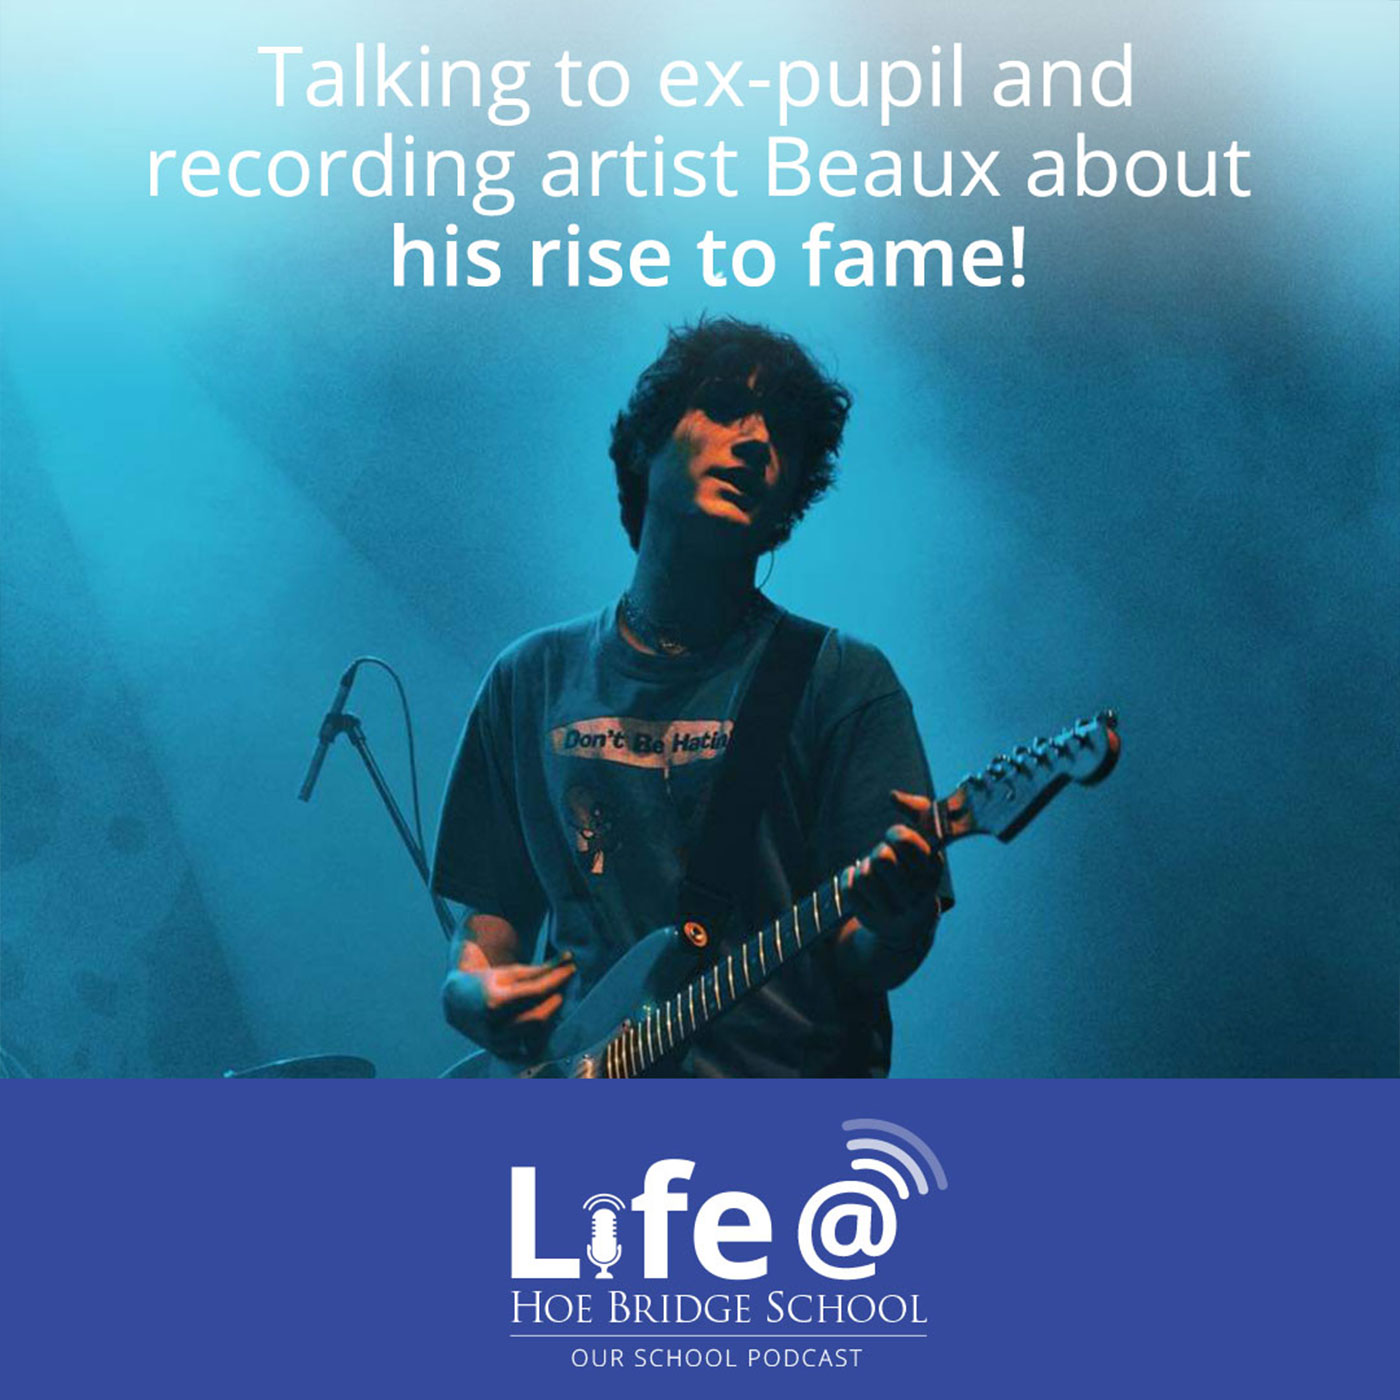 Talking to ex-pupil and recording artist Beaux about his rise to fame!